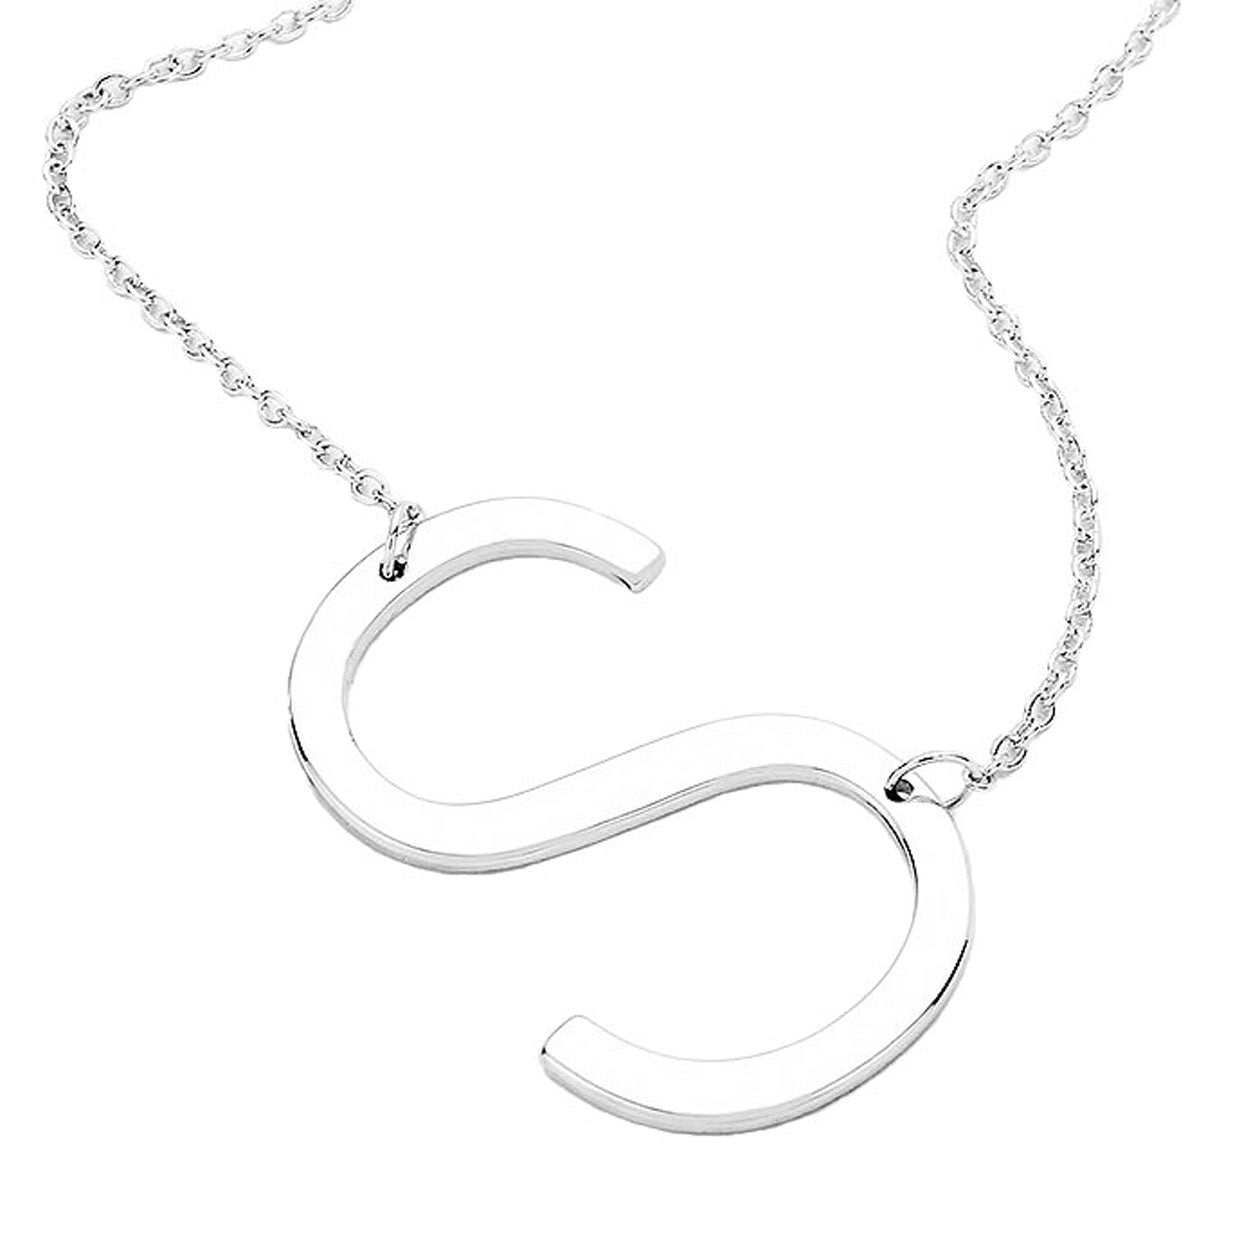 Silver S Monogram Metal Pendant Necklace. Beautifully crafted design adds a gorgeous glow to any outfit. Jewelry that fits your lifestyle! Perfect Birthday Gift, Anniversary Gift, Mother's Day Gift, Anniversary Gift, Graduation Gift, Prom Jewelry, Just Because Gift, Thank you Gift.